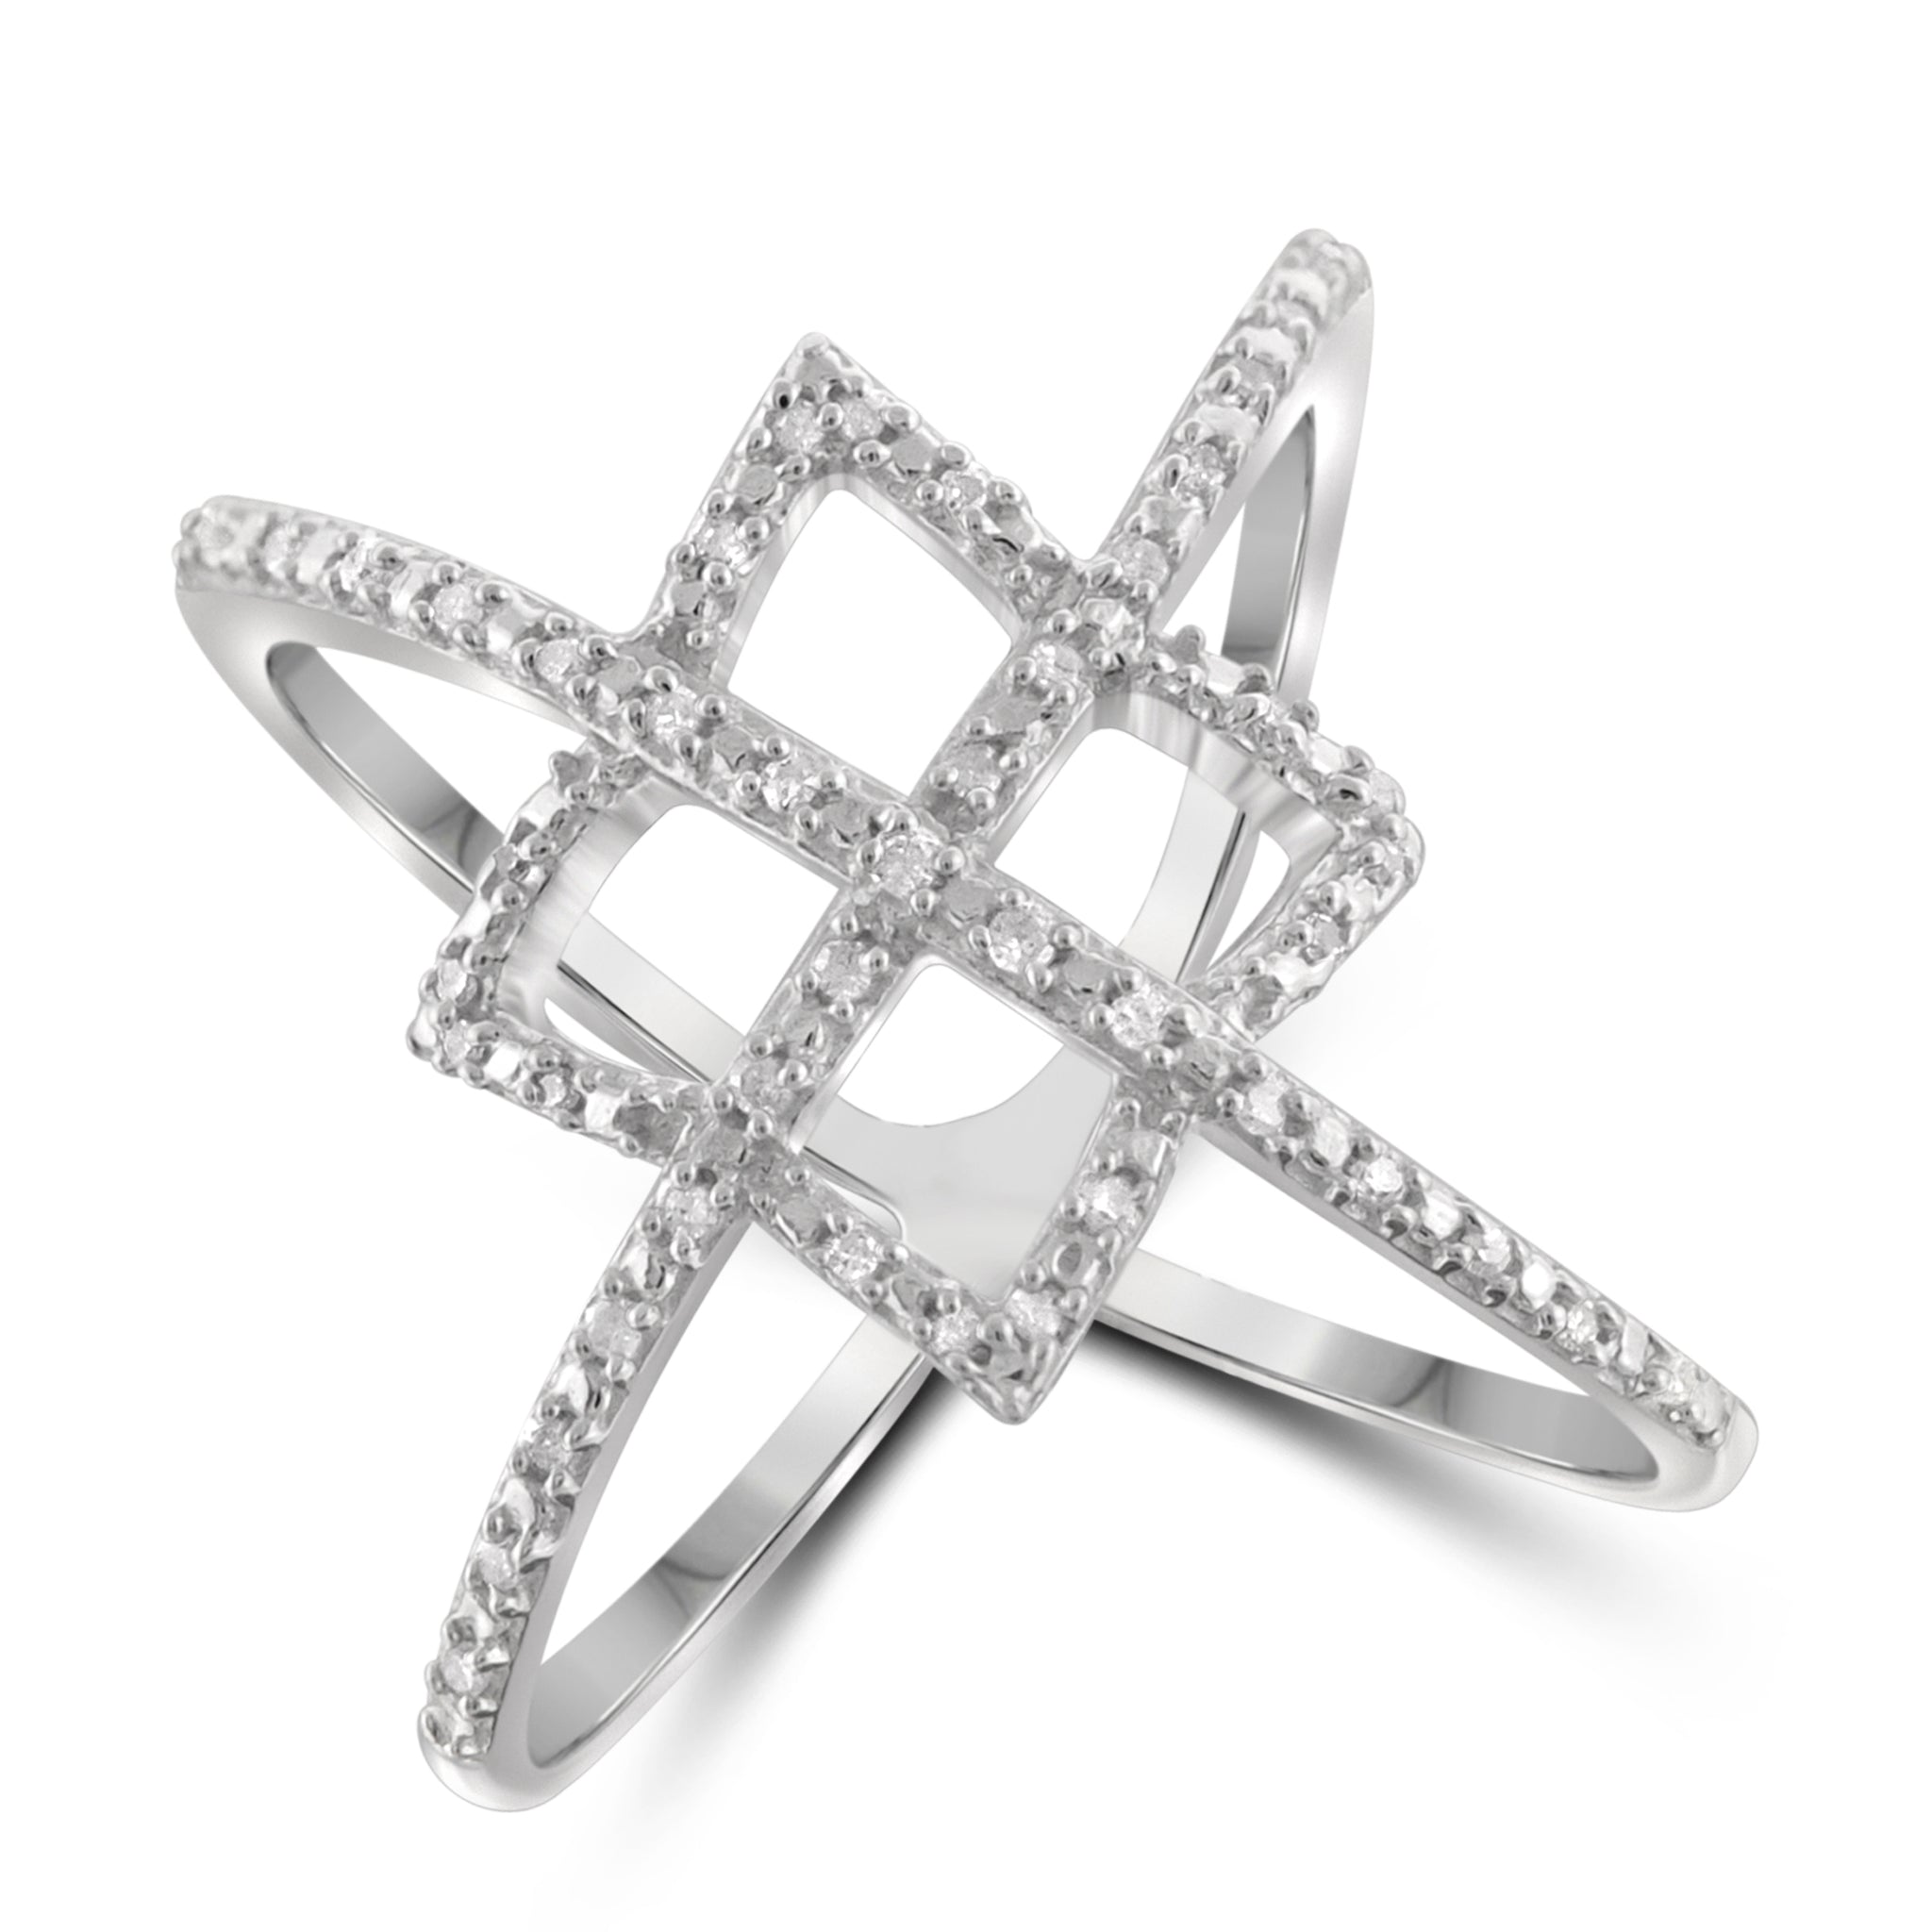 JewelonFire 1/7 Carat T.W. White Diamond Sterling Silver Crisscross Ring - Assorted Colors